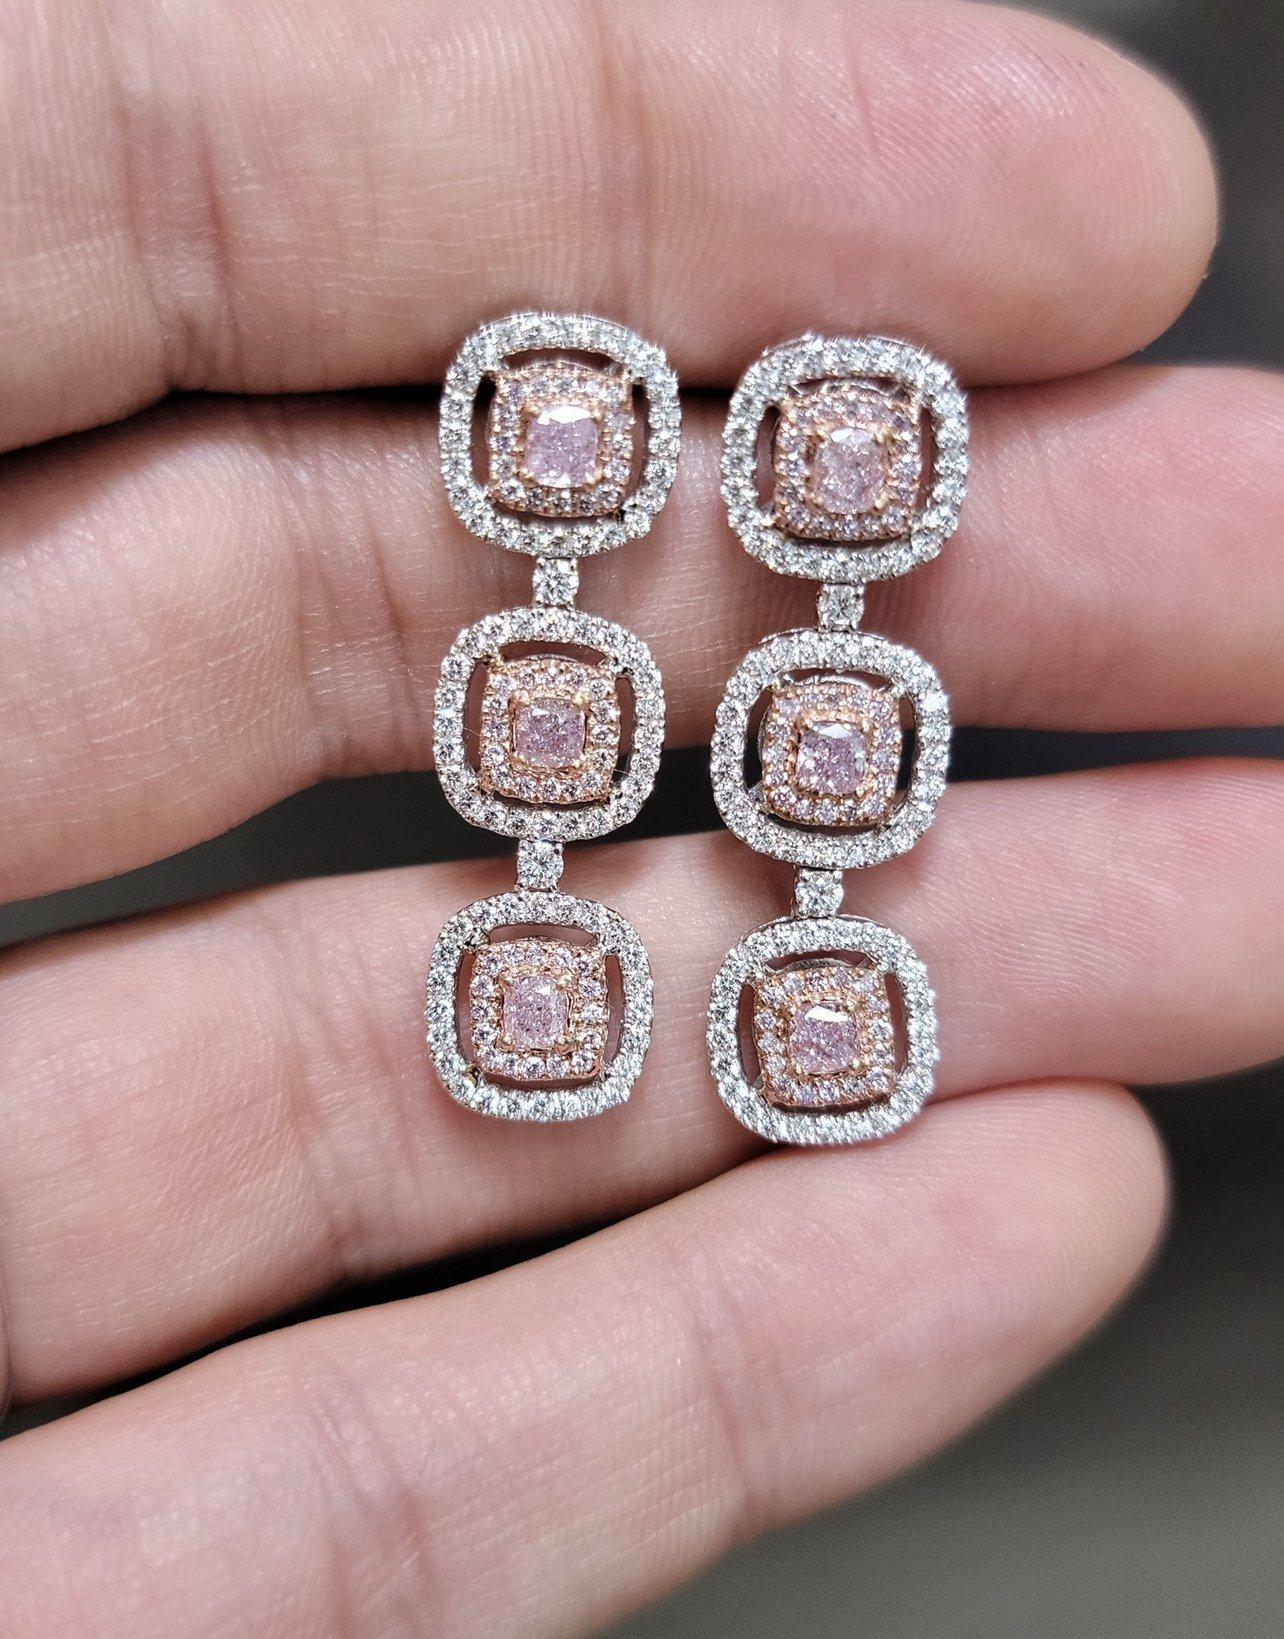 Gorgeous Pink Diamond three cushion double halo earrings, set in White and Rose Gold, with 2.6ct of natural pink and white diamonds
Featured are Pink cushion cut diamonds surrounded by pink and white diamond halos.  These are the ultimate elegant